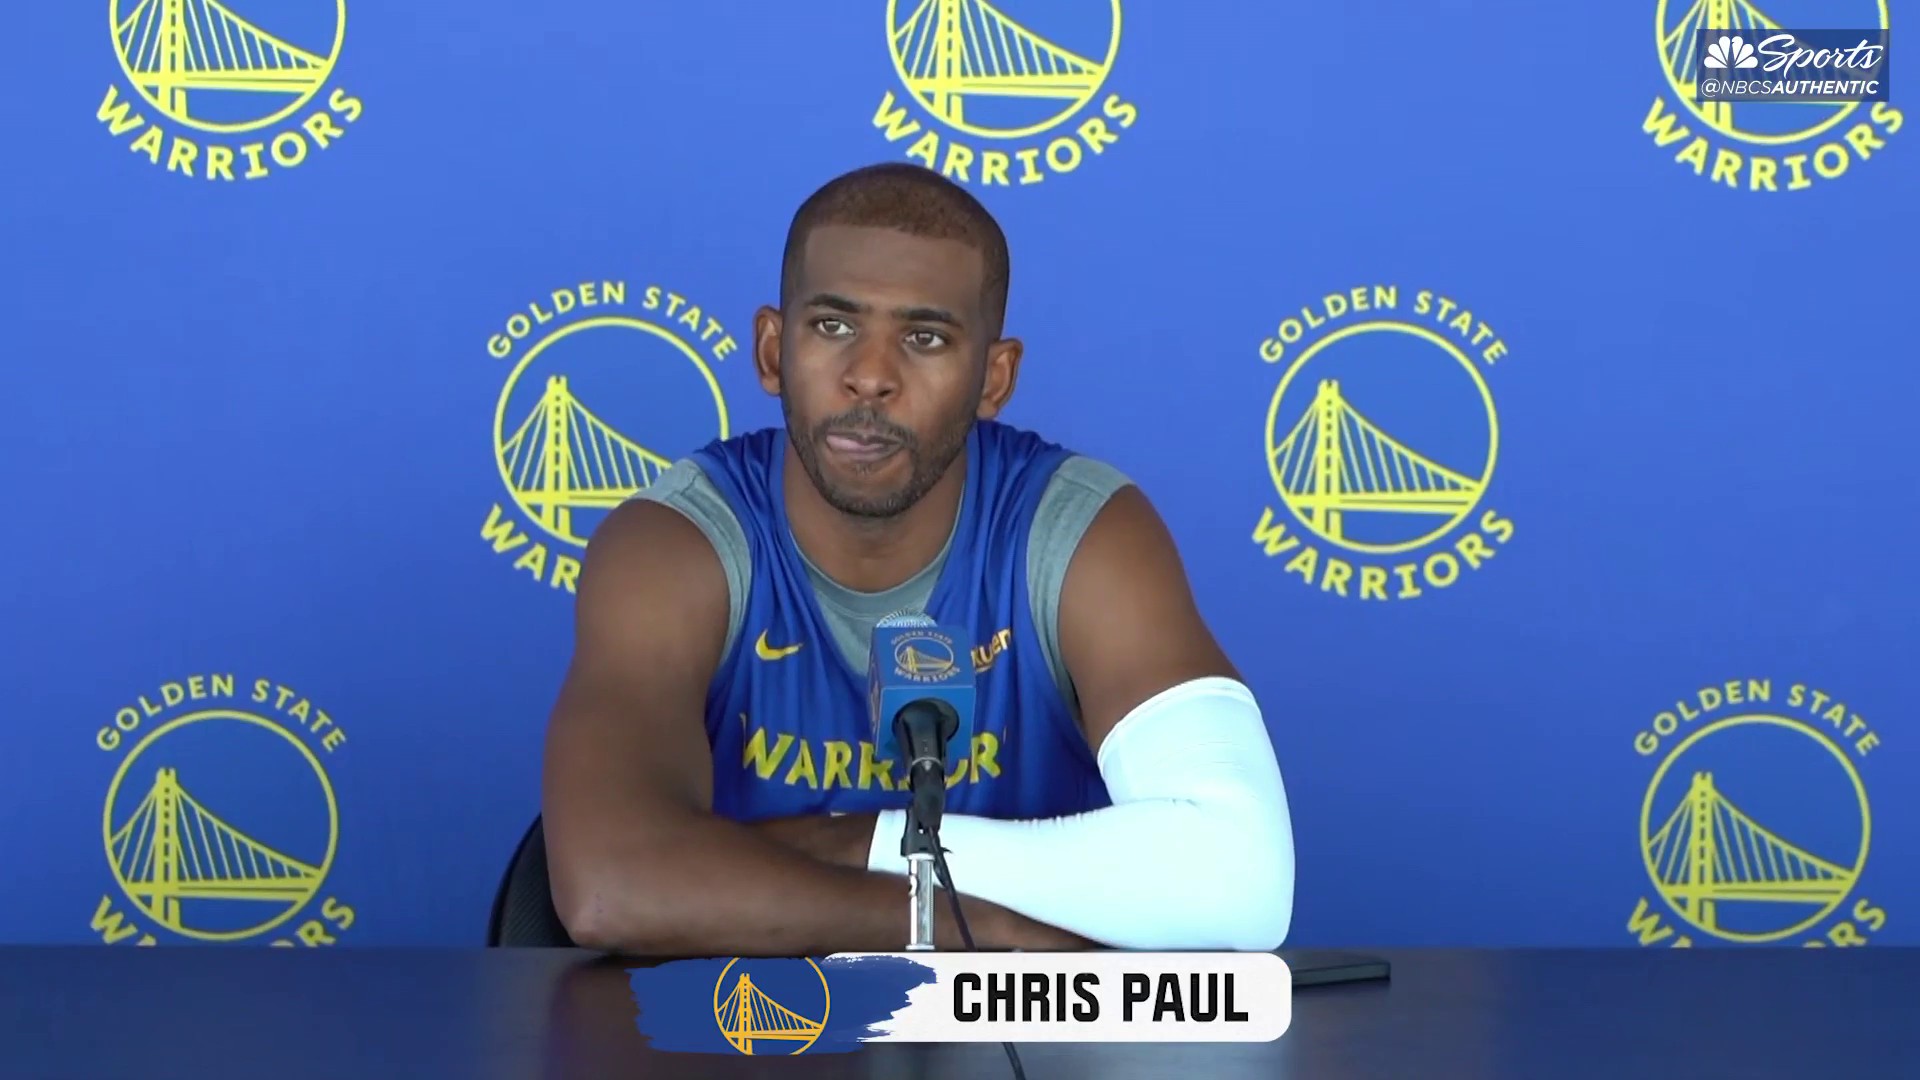 Chris Paul shares what a blessing it is to play for Warriors this